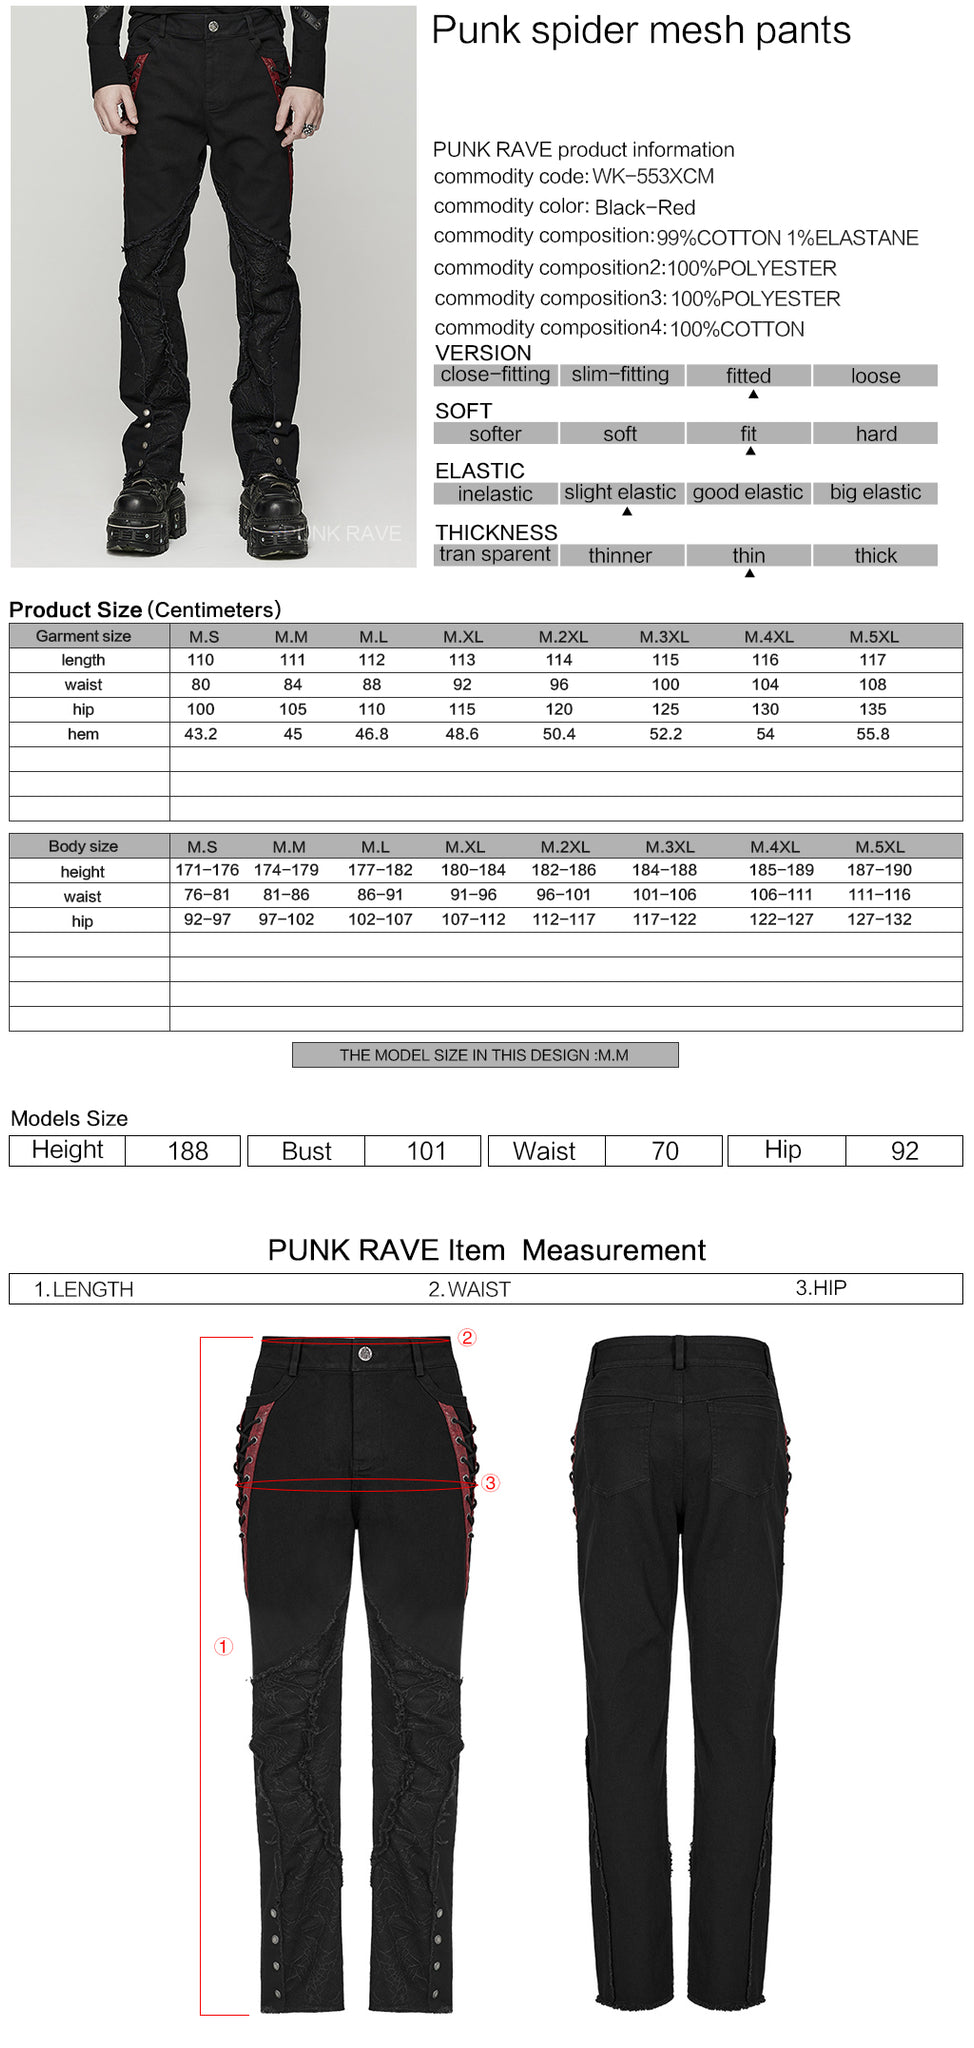 Punk spider mesh Men pants WK-553XCM Black with Red